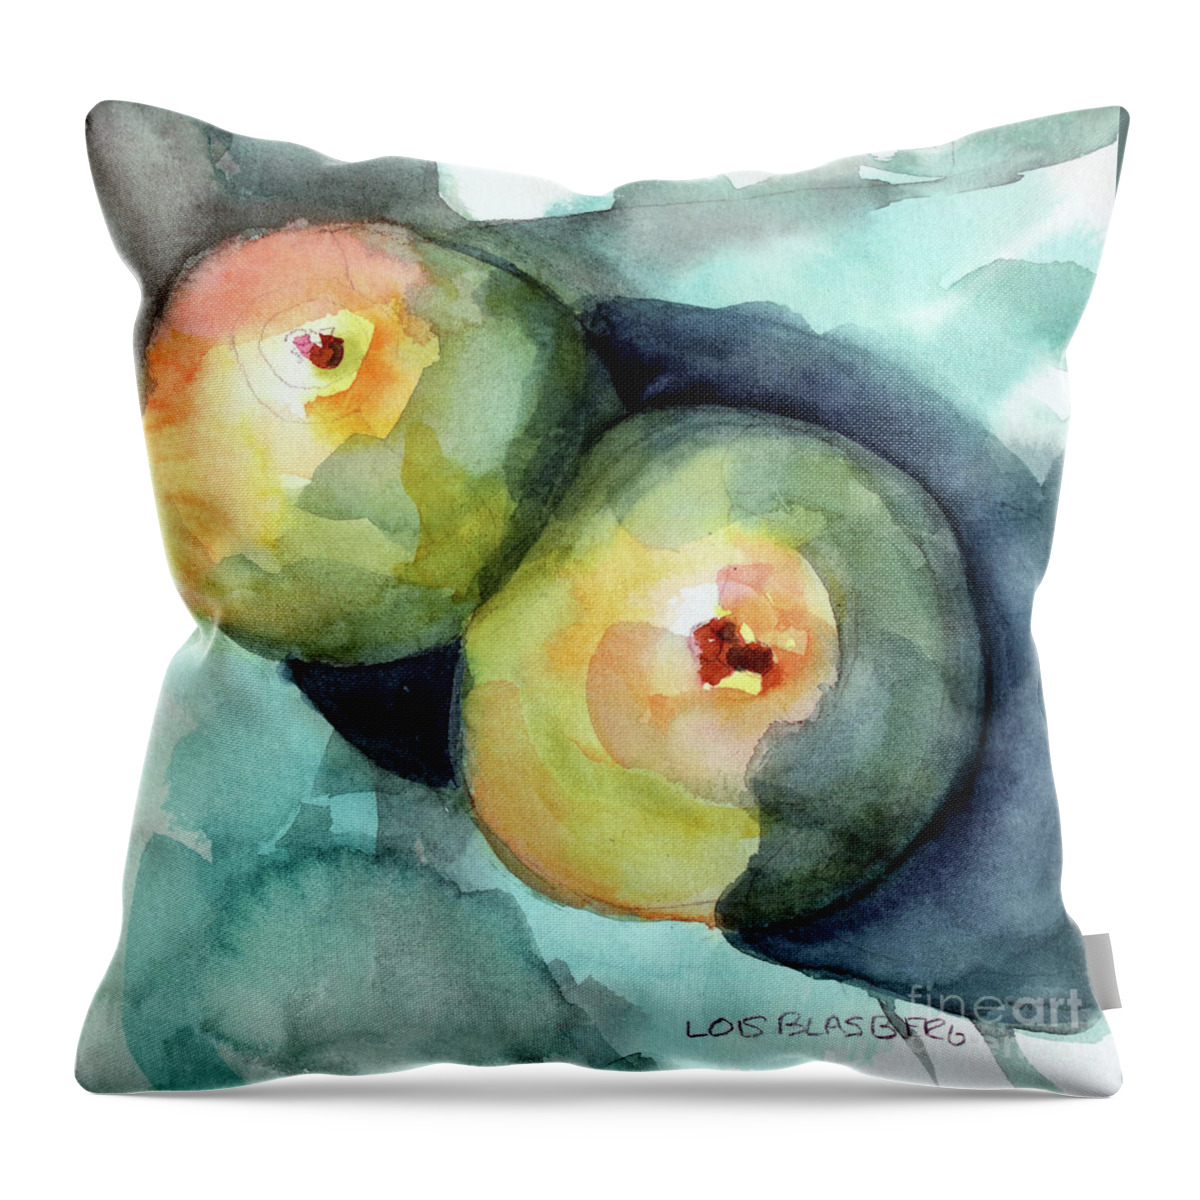 Face Mask Throw Pillow featuring the painting Pair by Lois Blasberg